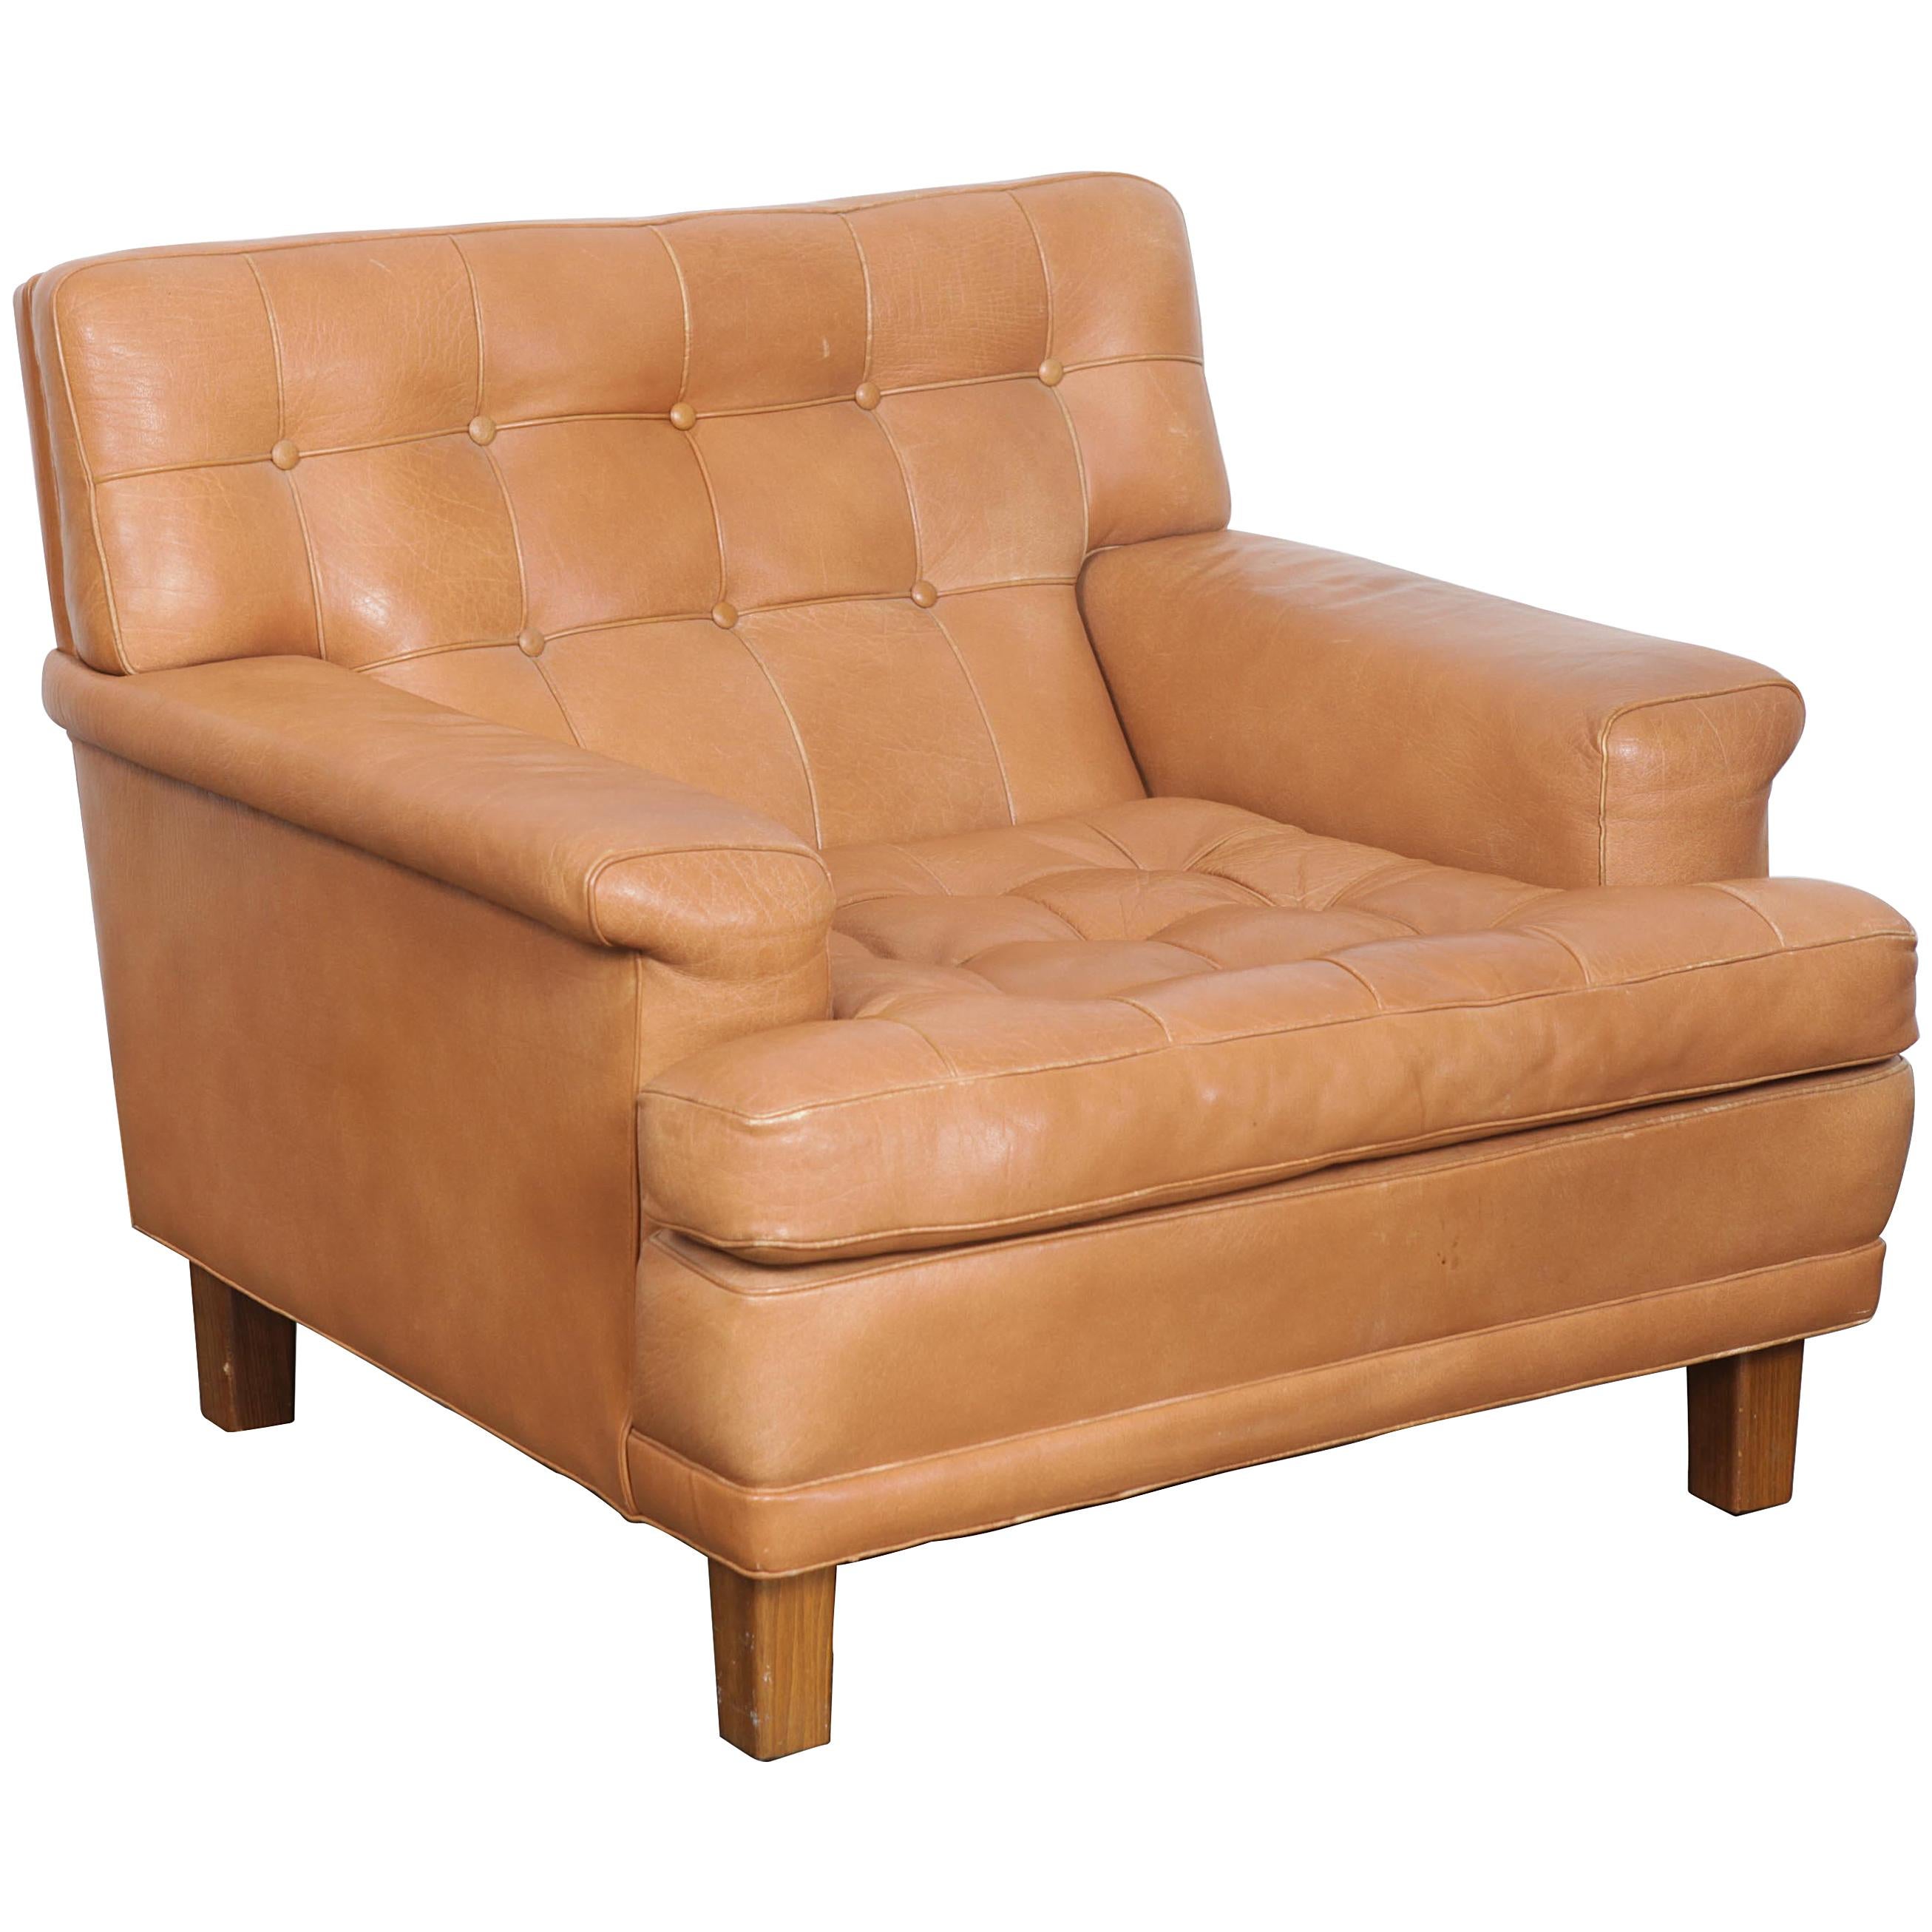 Arne Norell Merkur Tan Leather Tufted Lounge Chair, Sweden, Norell AB